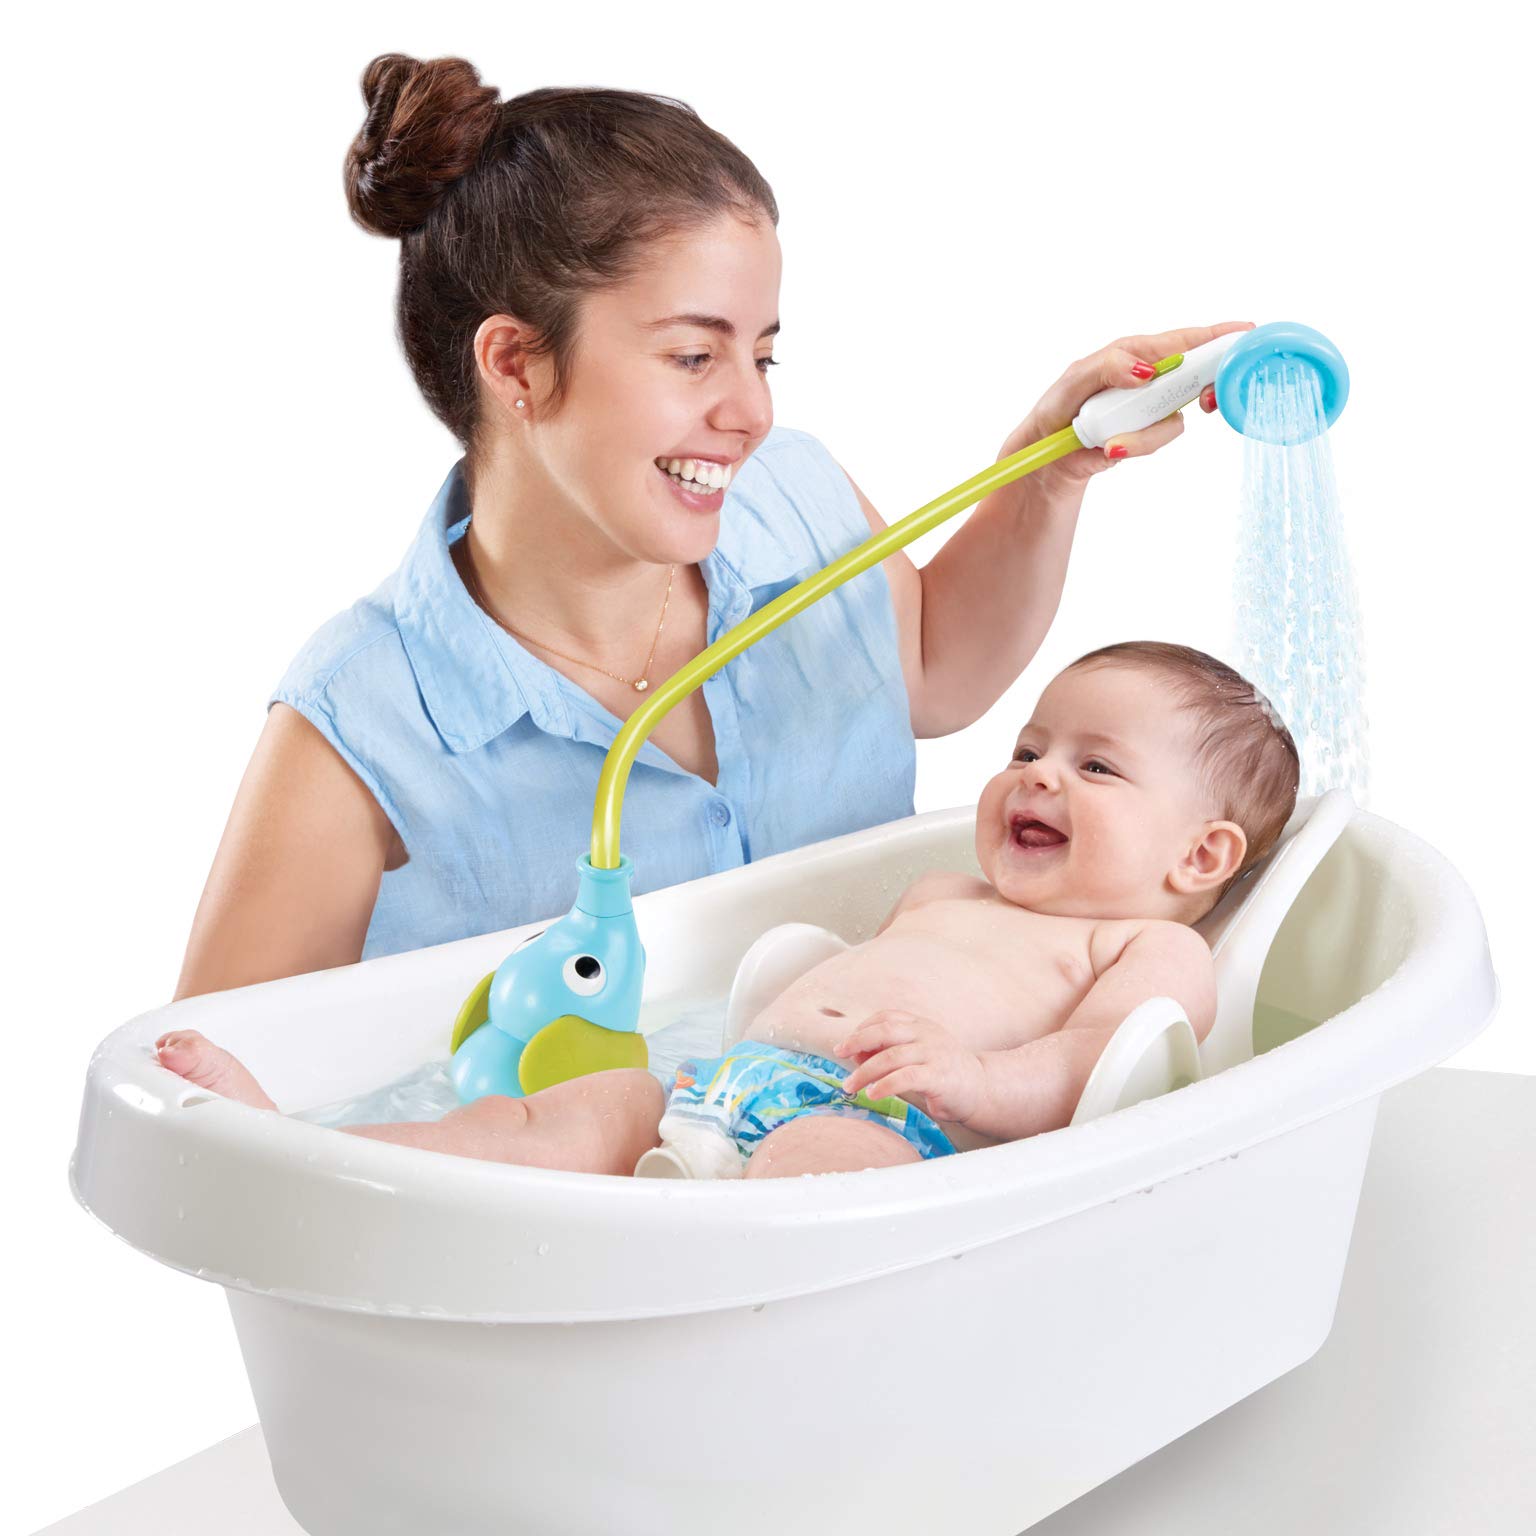 Yookidoo Baby Bath Shower Head - Elephant Water Pump and Trunk Spout Rinser - for Newborn Babies in Tub Or Sink